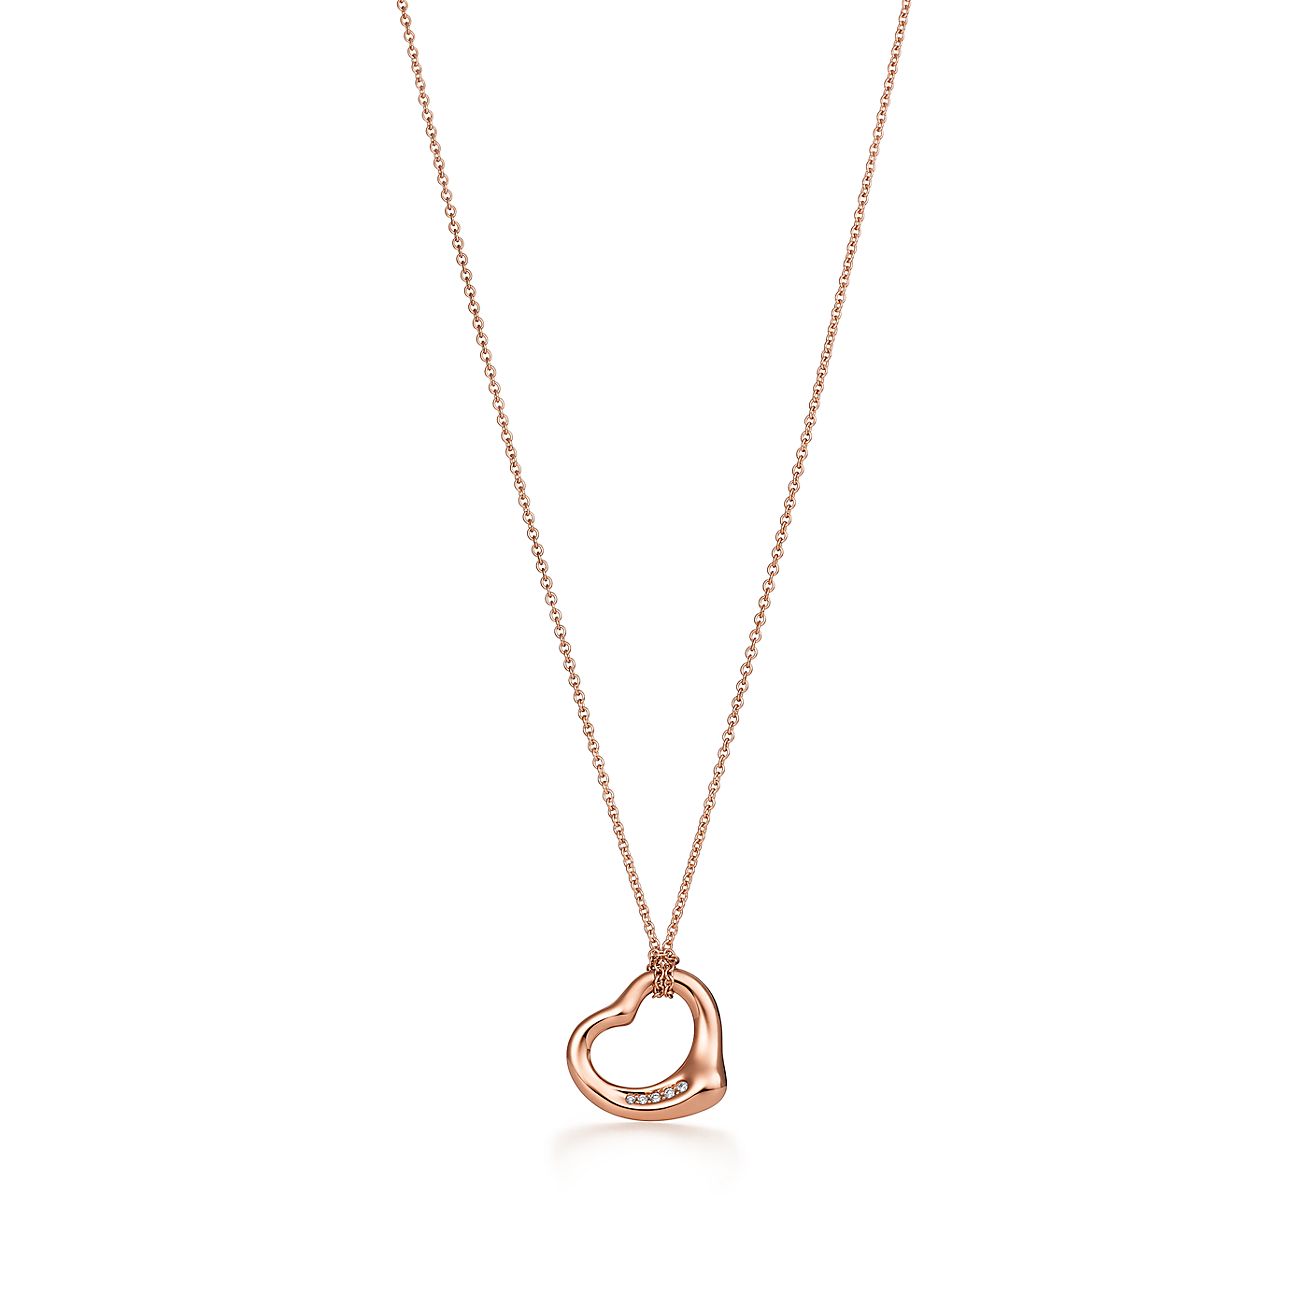 Elsa Peretti Open Heart Pendant in 18K Gold. More Sizes Available, Size: 22 mm